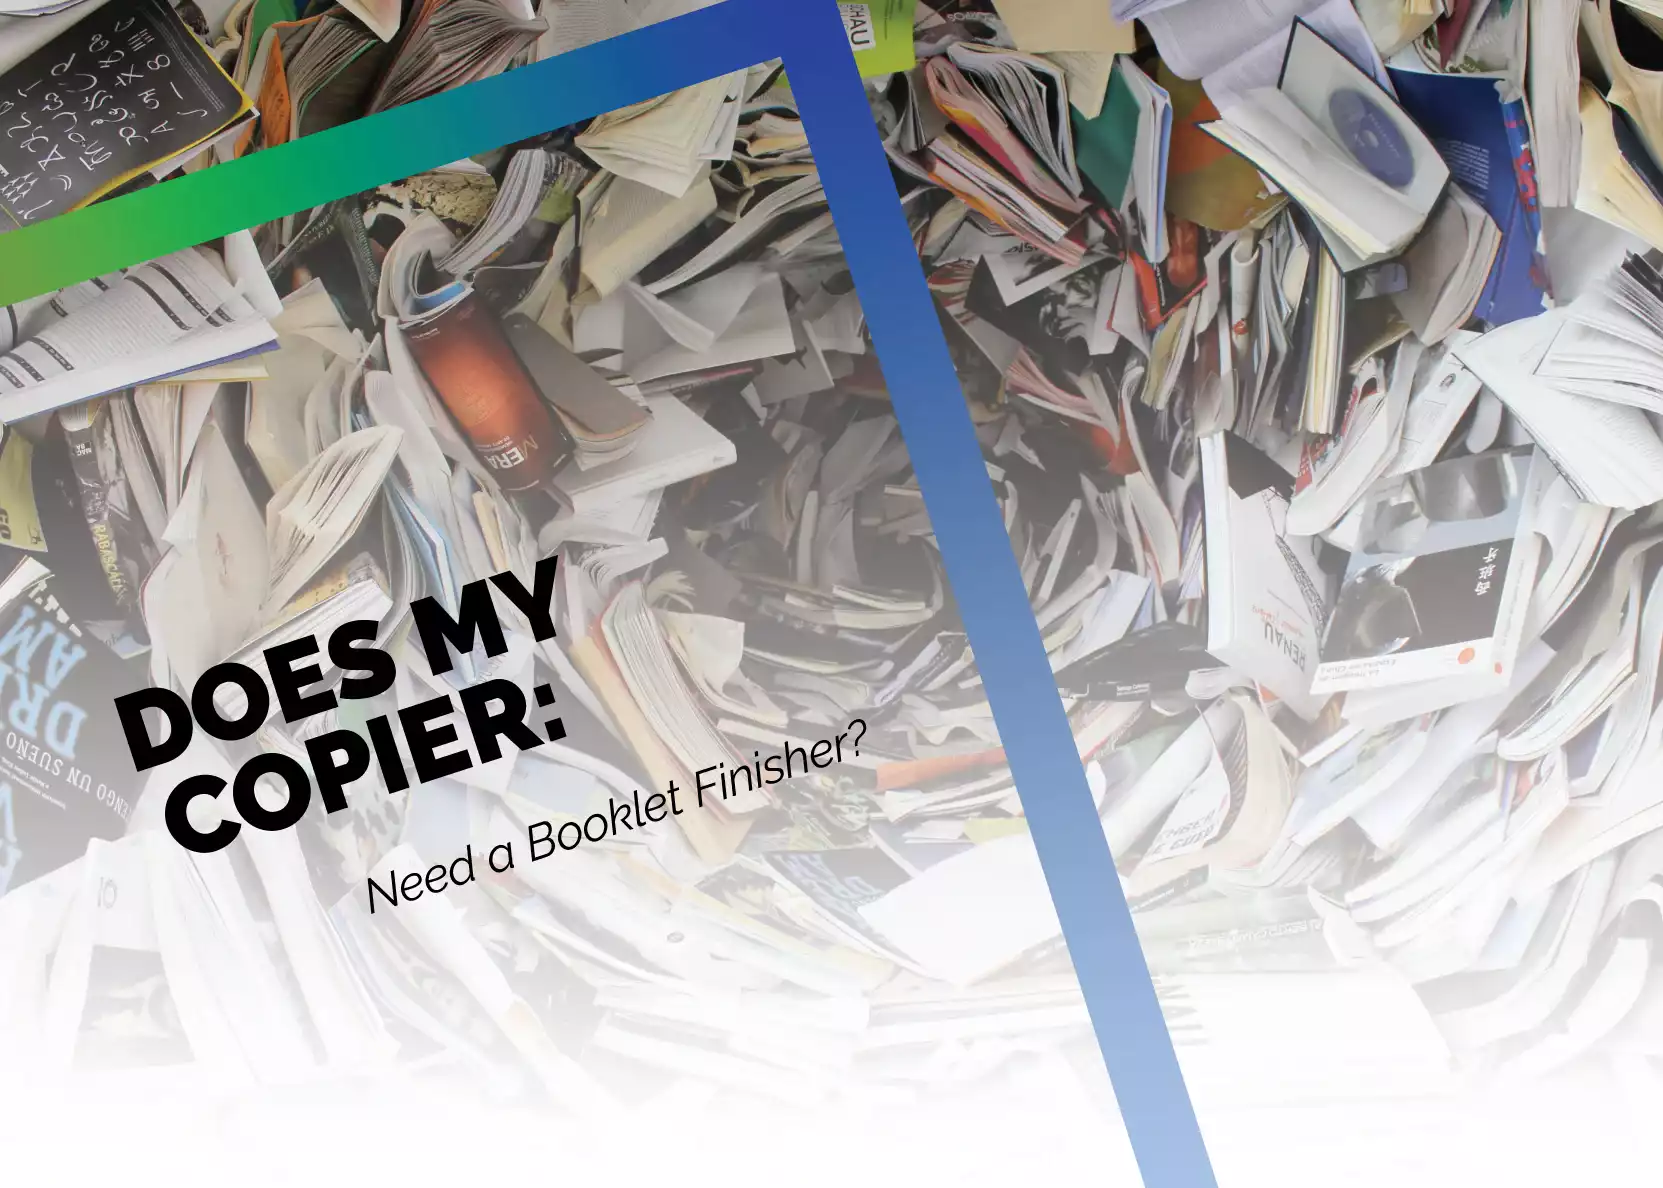 blog header image - Does my copier need a booklet finisher?